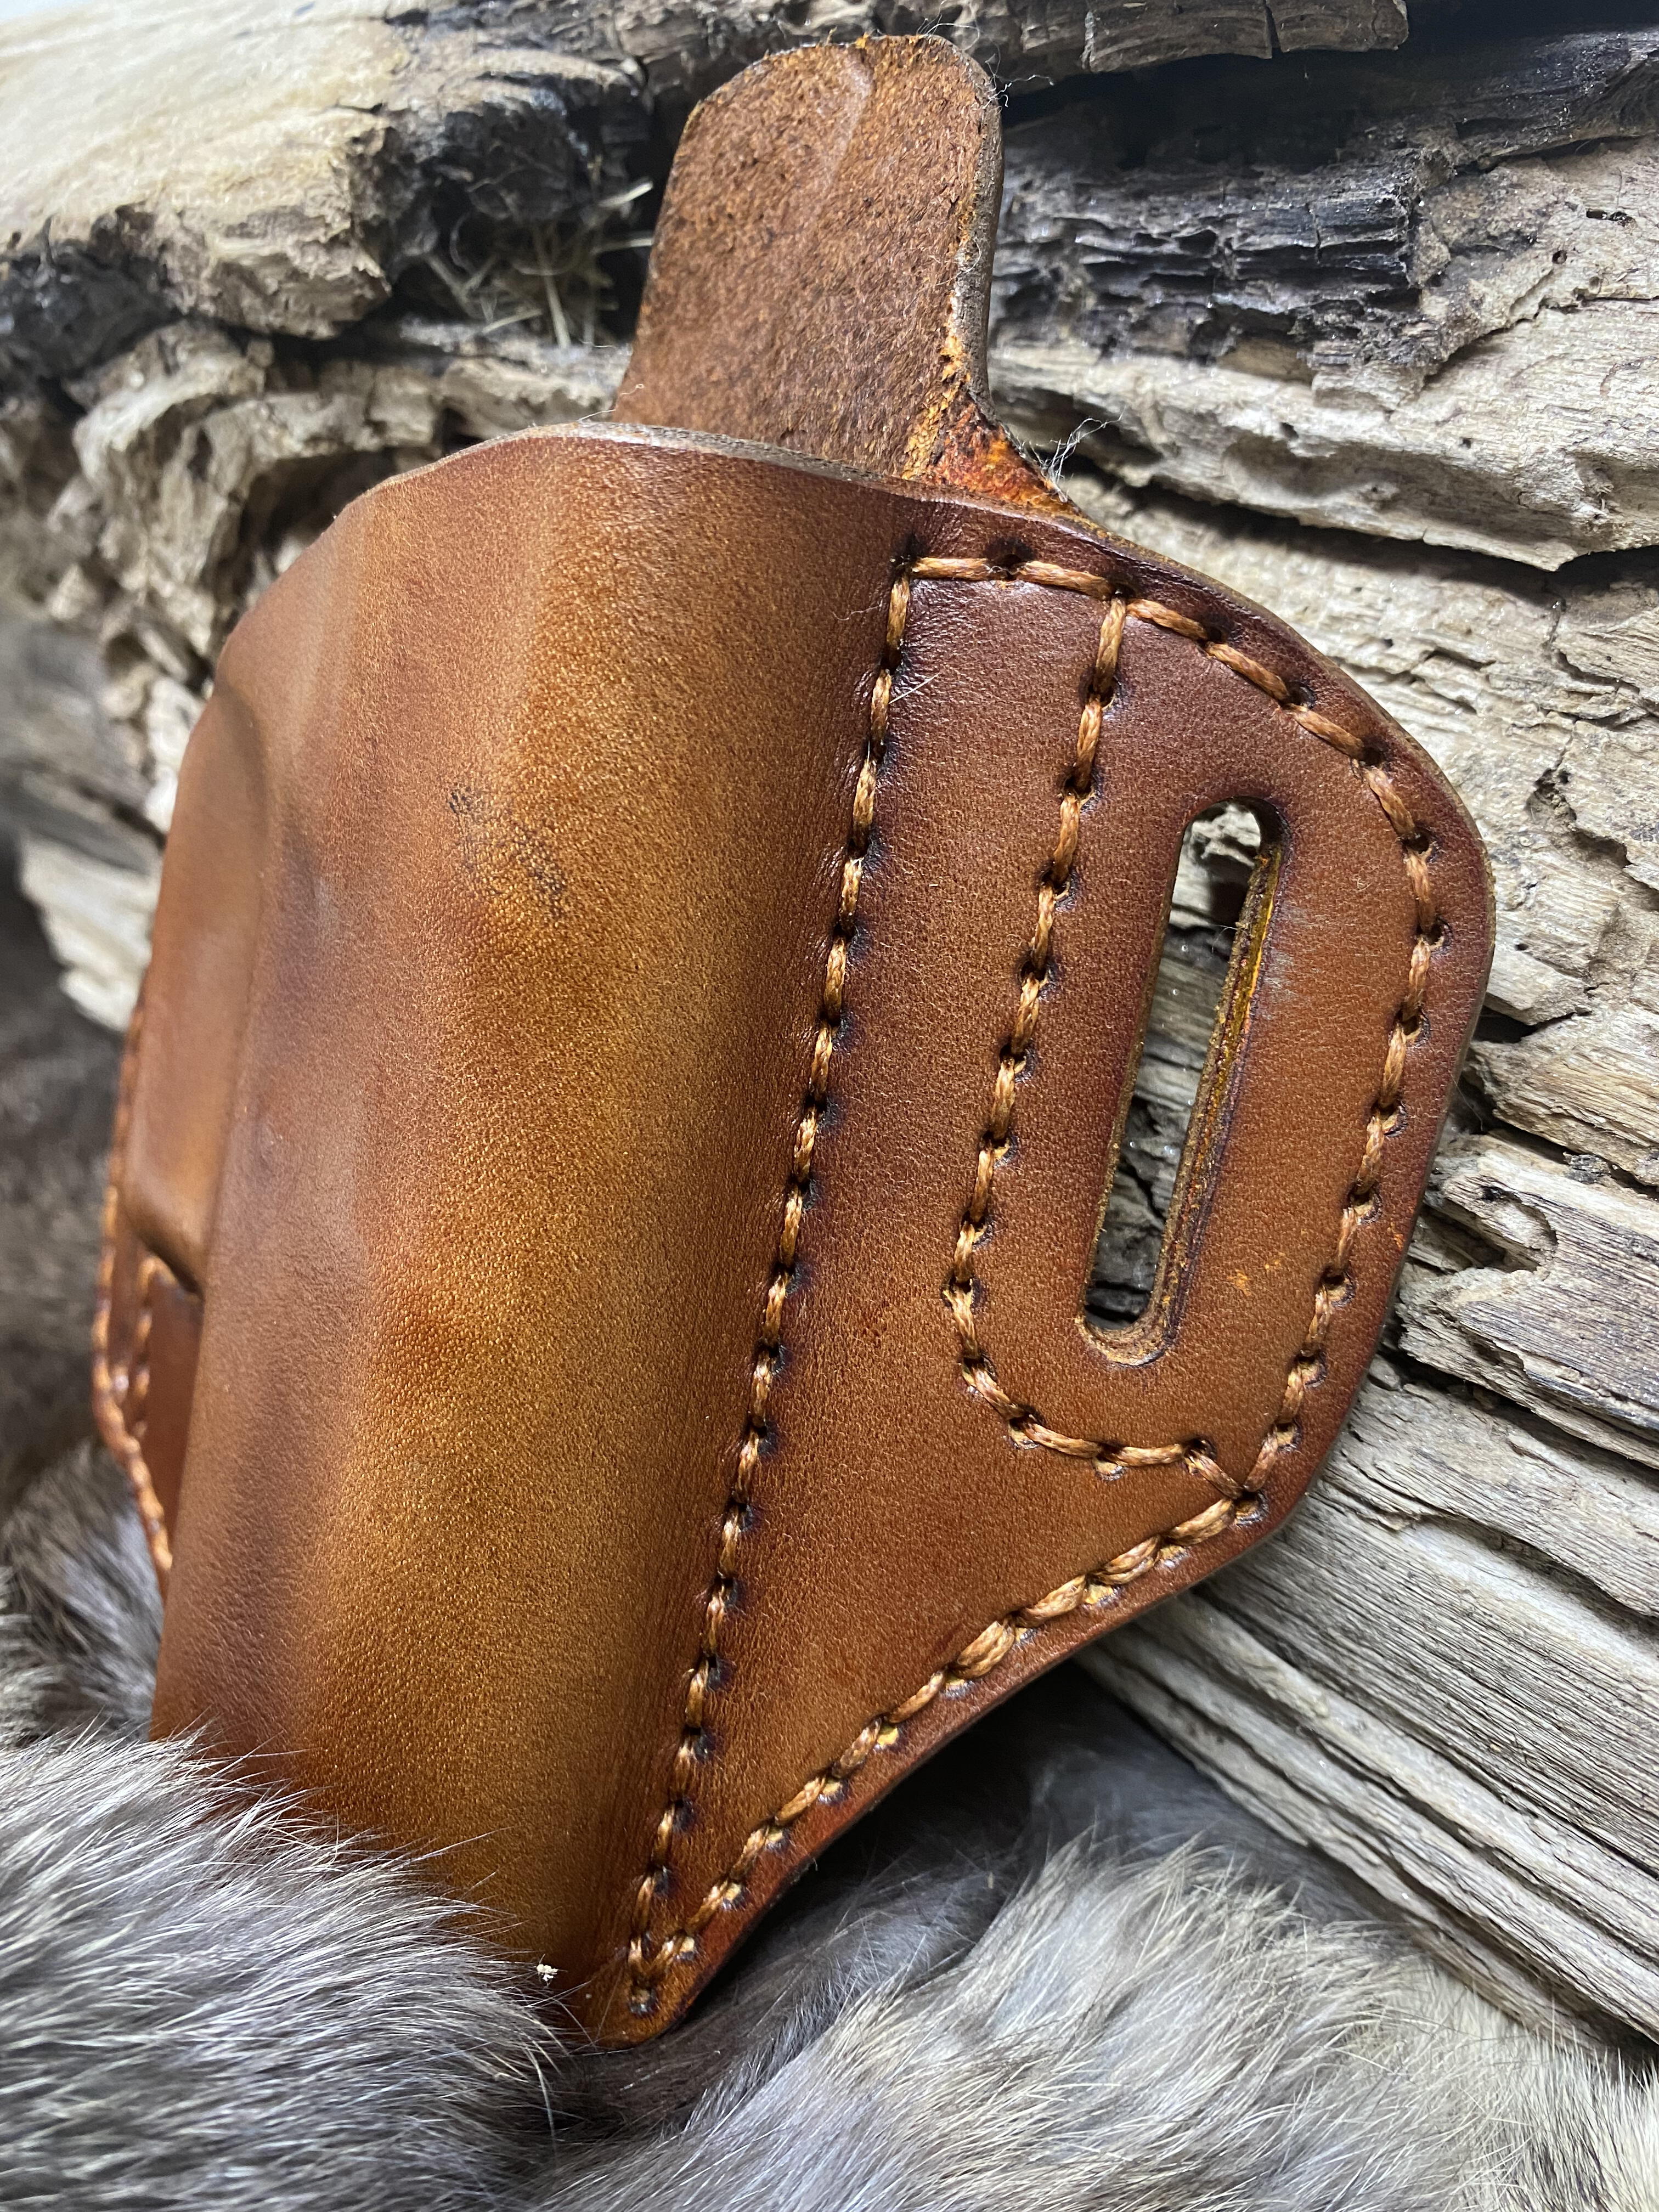 Details about   Leather Pancake OWB Holster for Glock 42 Handmade in the USA Black or Brown 